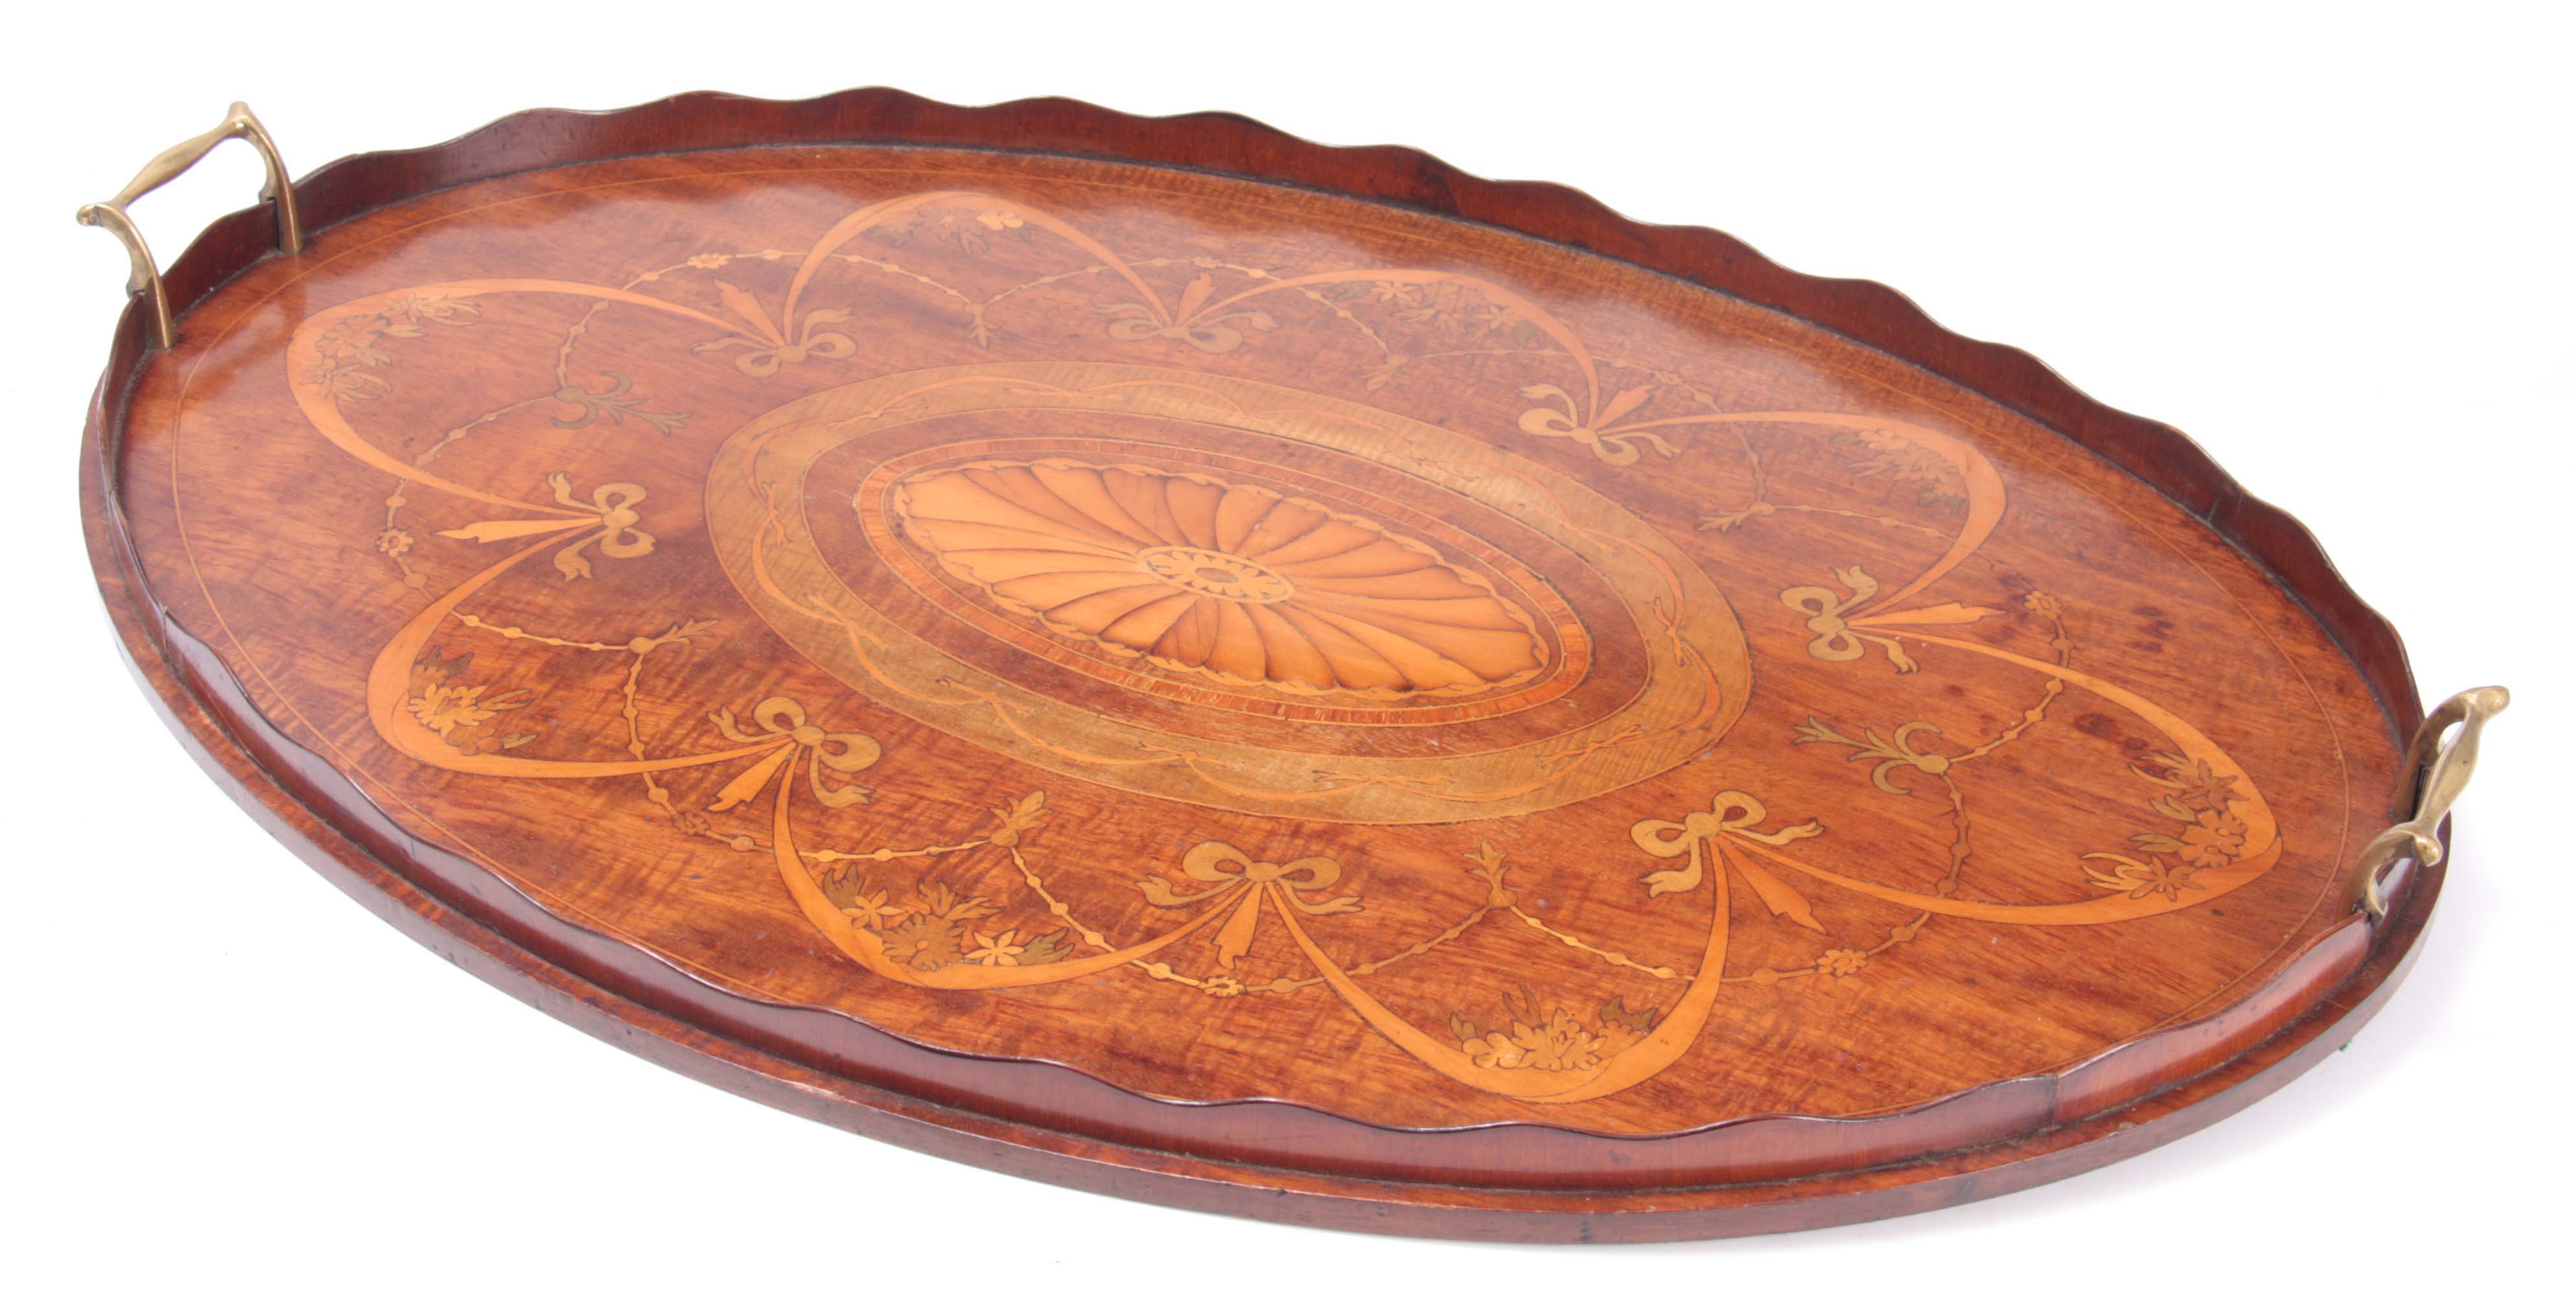 A 19TH CENTURY INLAID MAHOGANY OVAL TRAY with brass side handles and wavey edge gallery 71cm wide